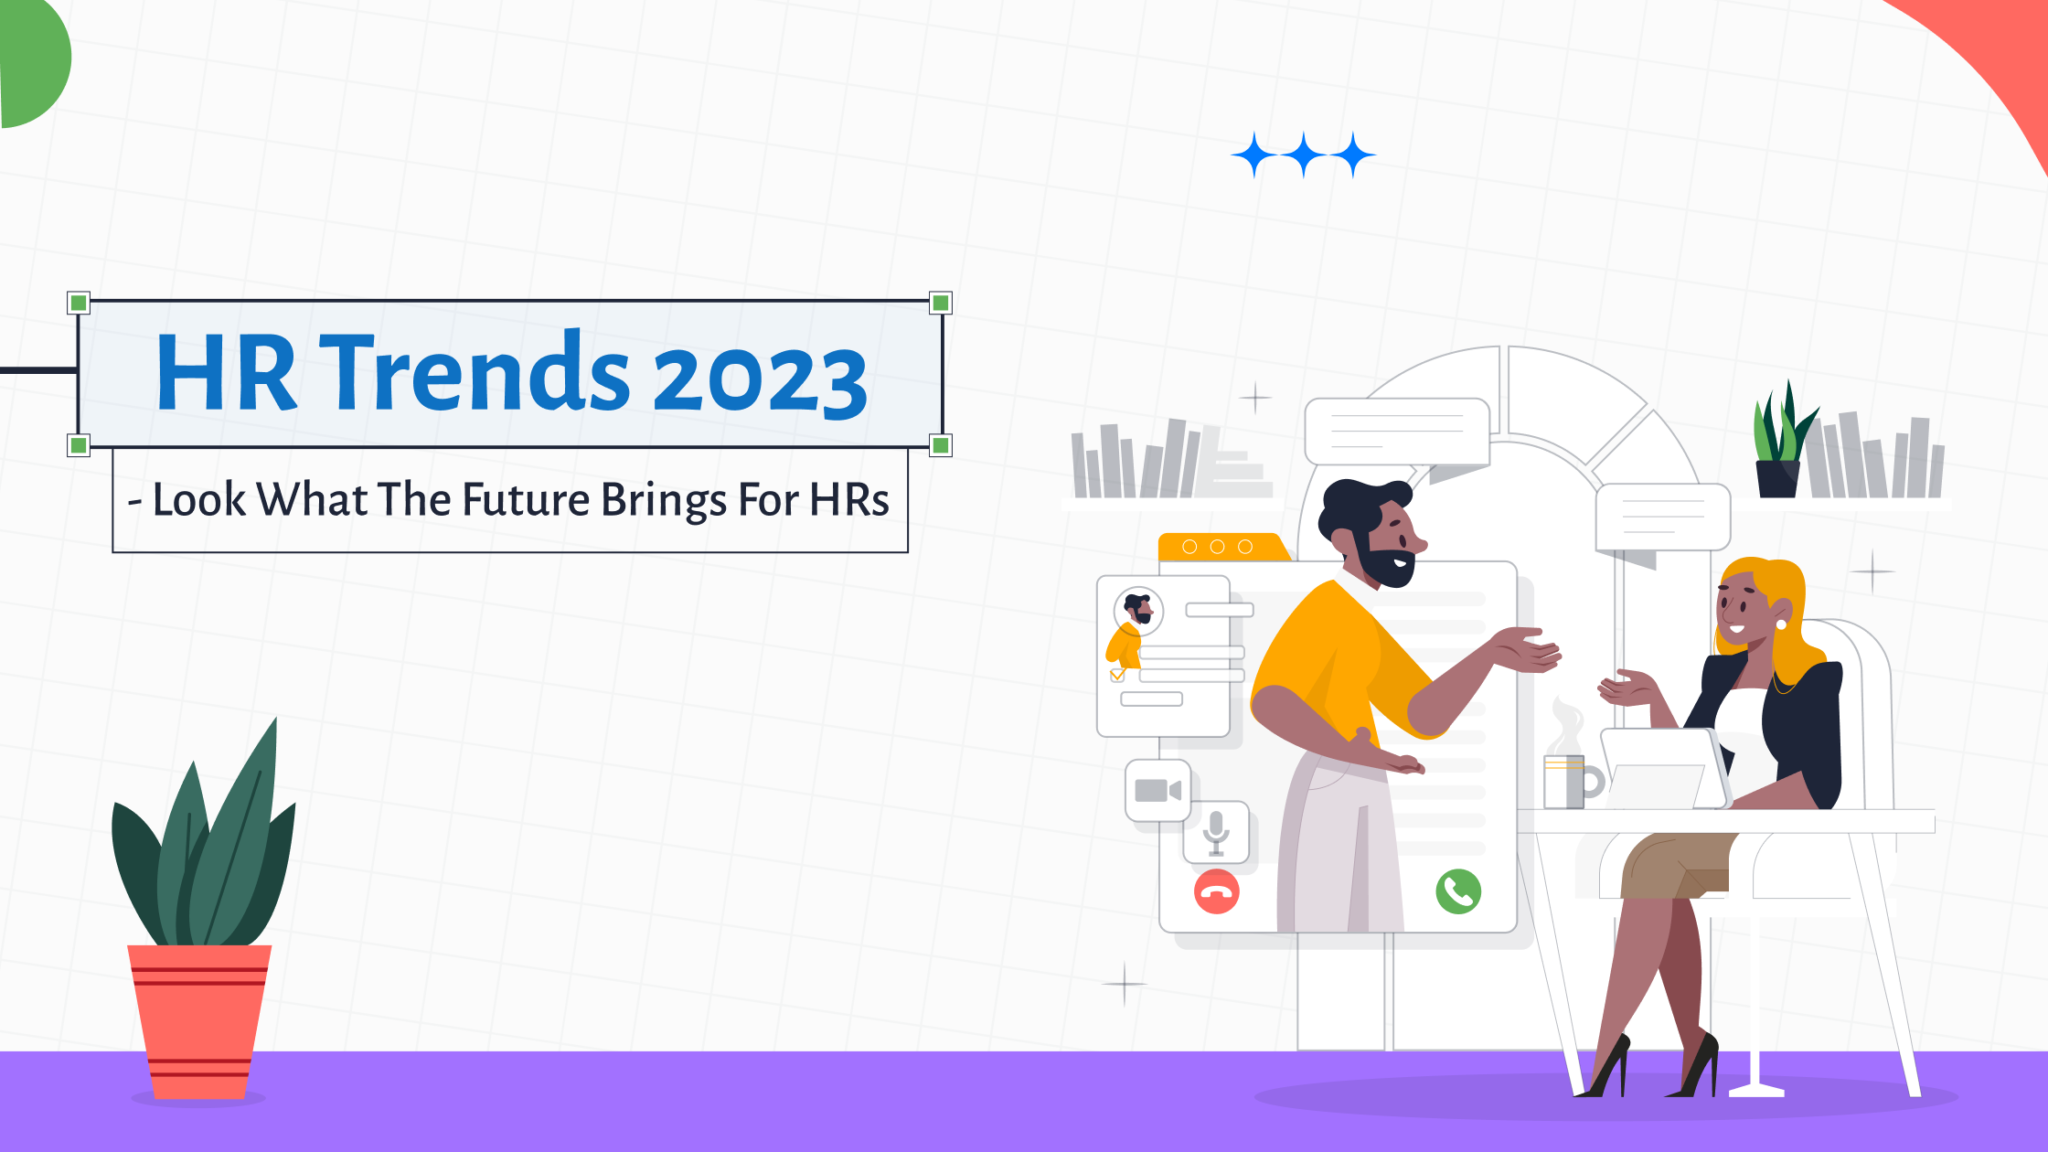 HR Trends 2023 Look What the Future Brings for HRs